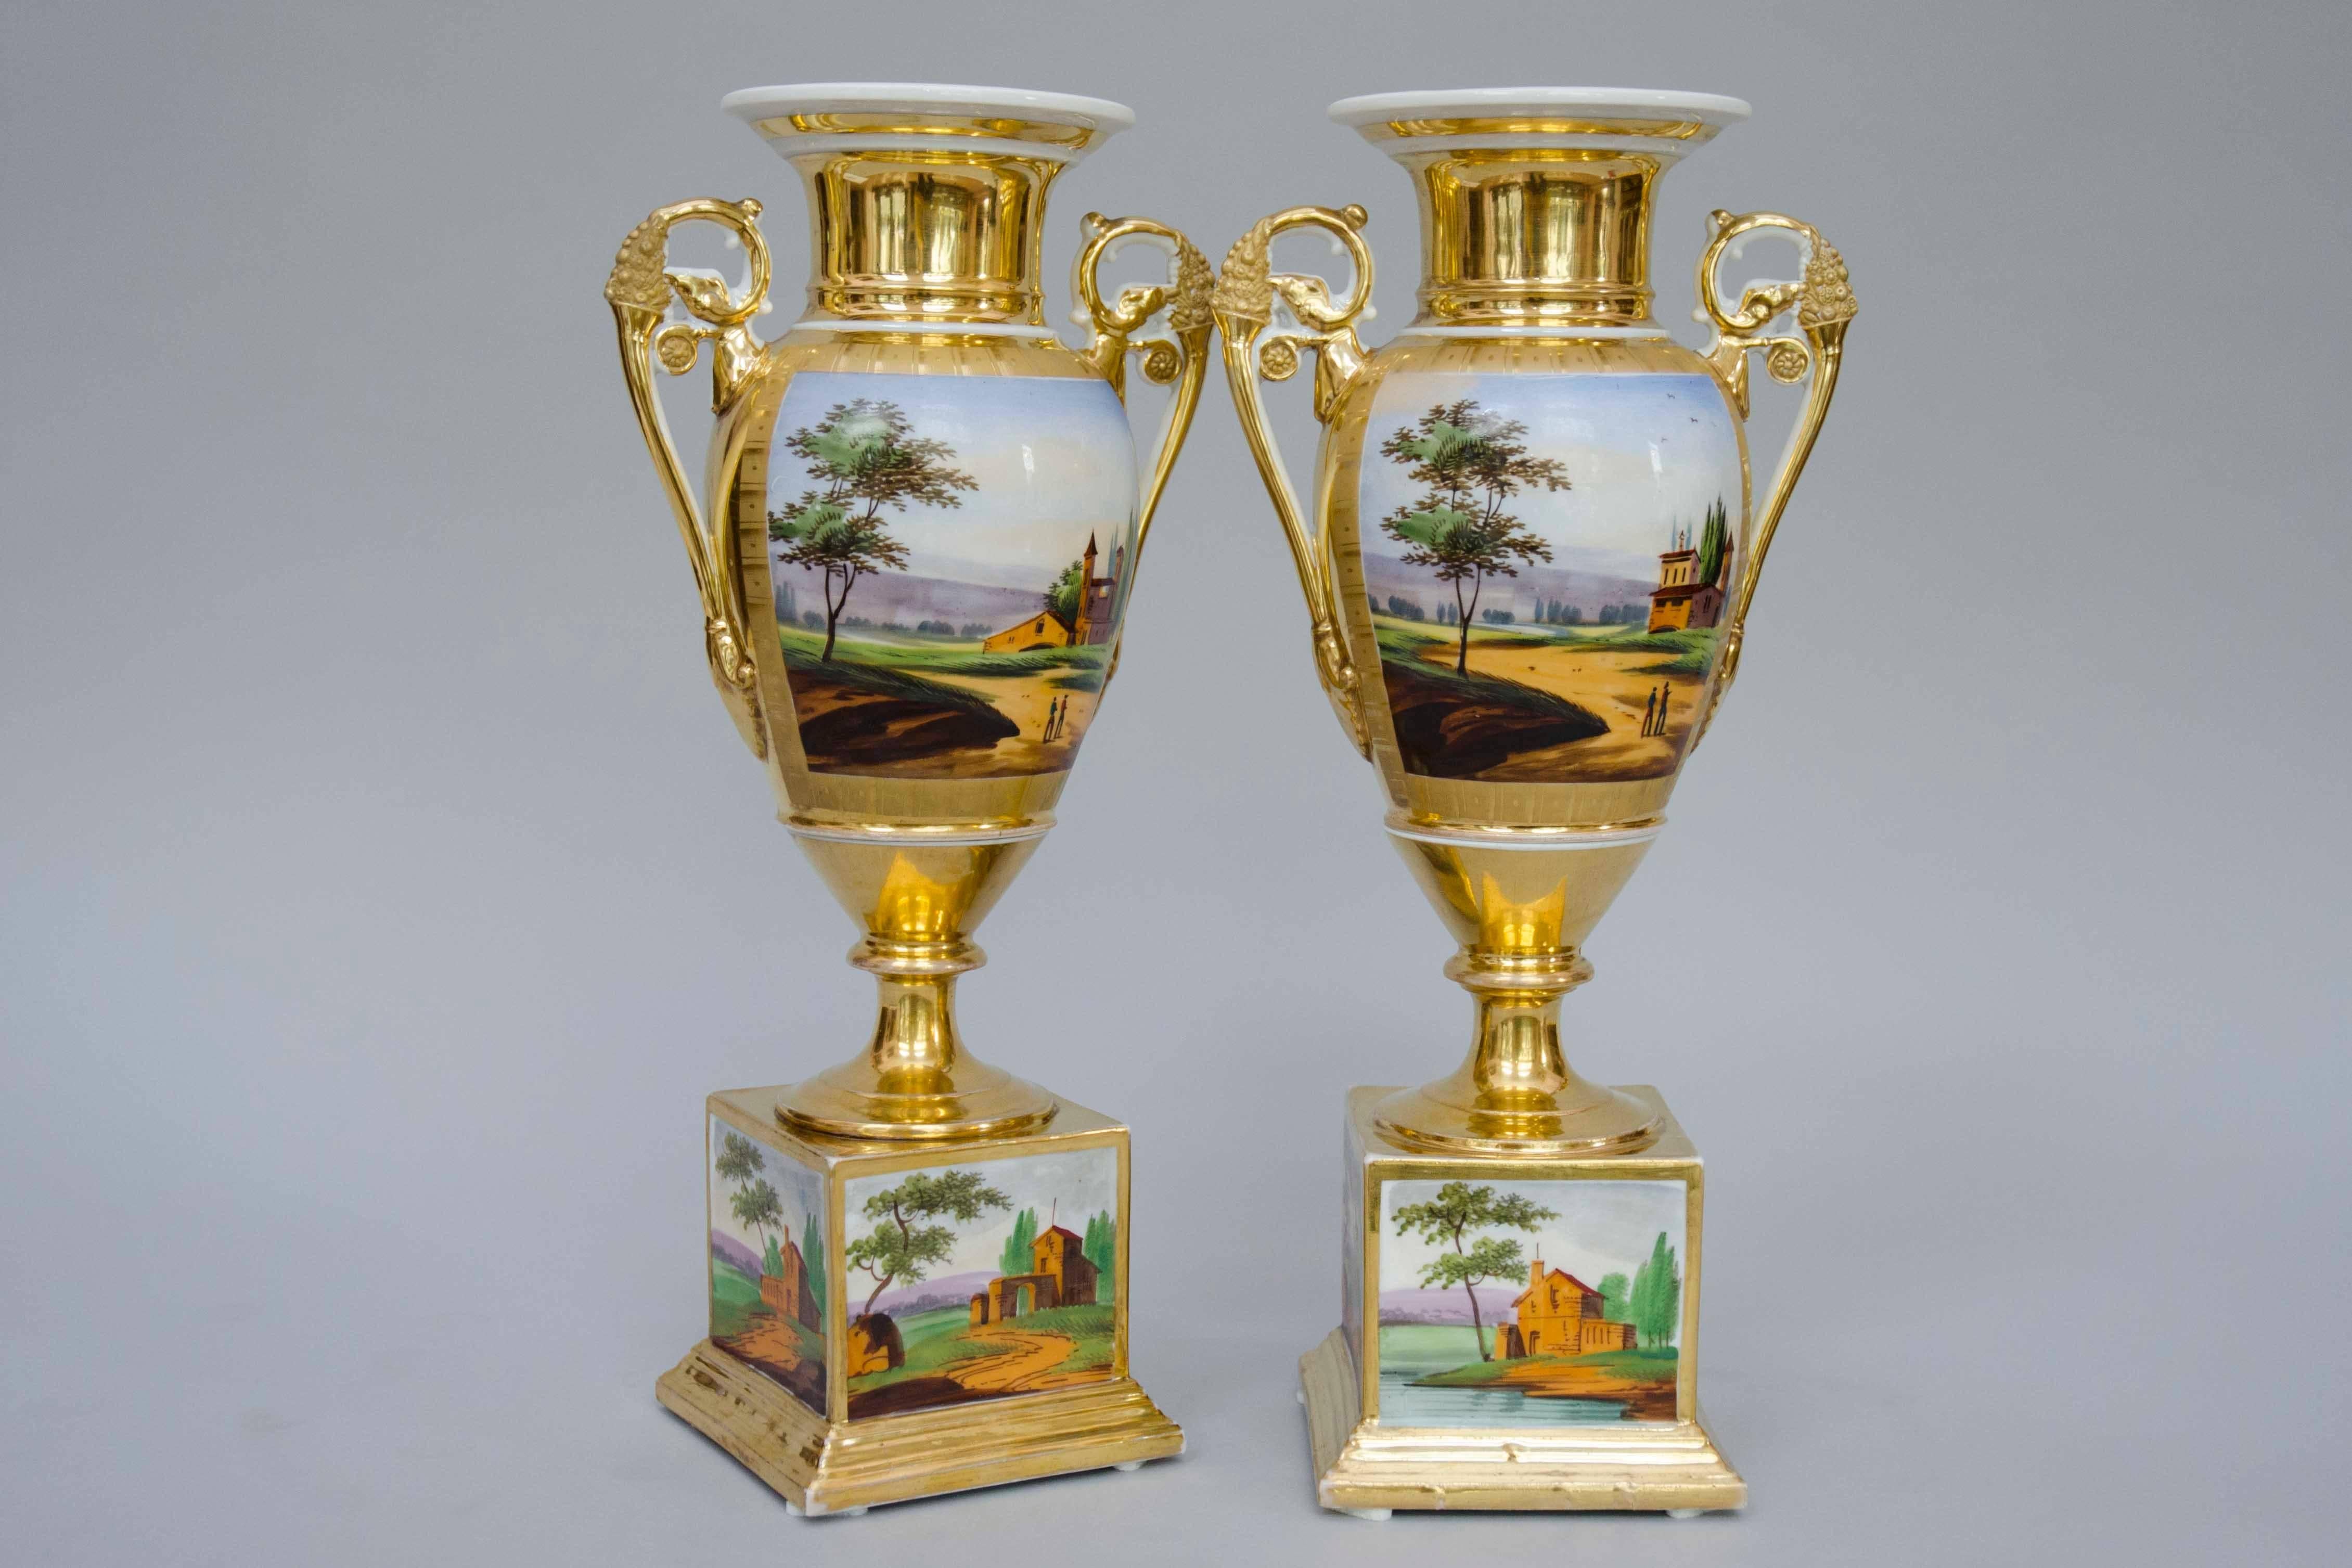 Lovely pair of very decorative and unusual 19th century vases in egg shape on square bases. Fruit baskets as handles. Nice gilding with no wear and nice painted landscapes. 
Size: H 36cm - square bases: 9cm x 9cm
Manufactory of XL, Brussels, circa